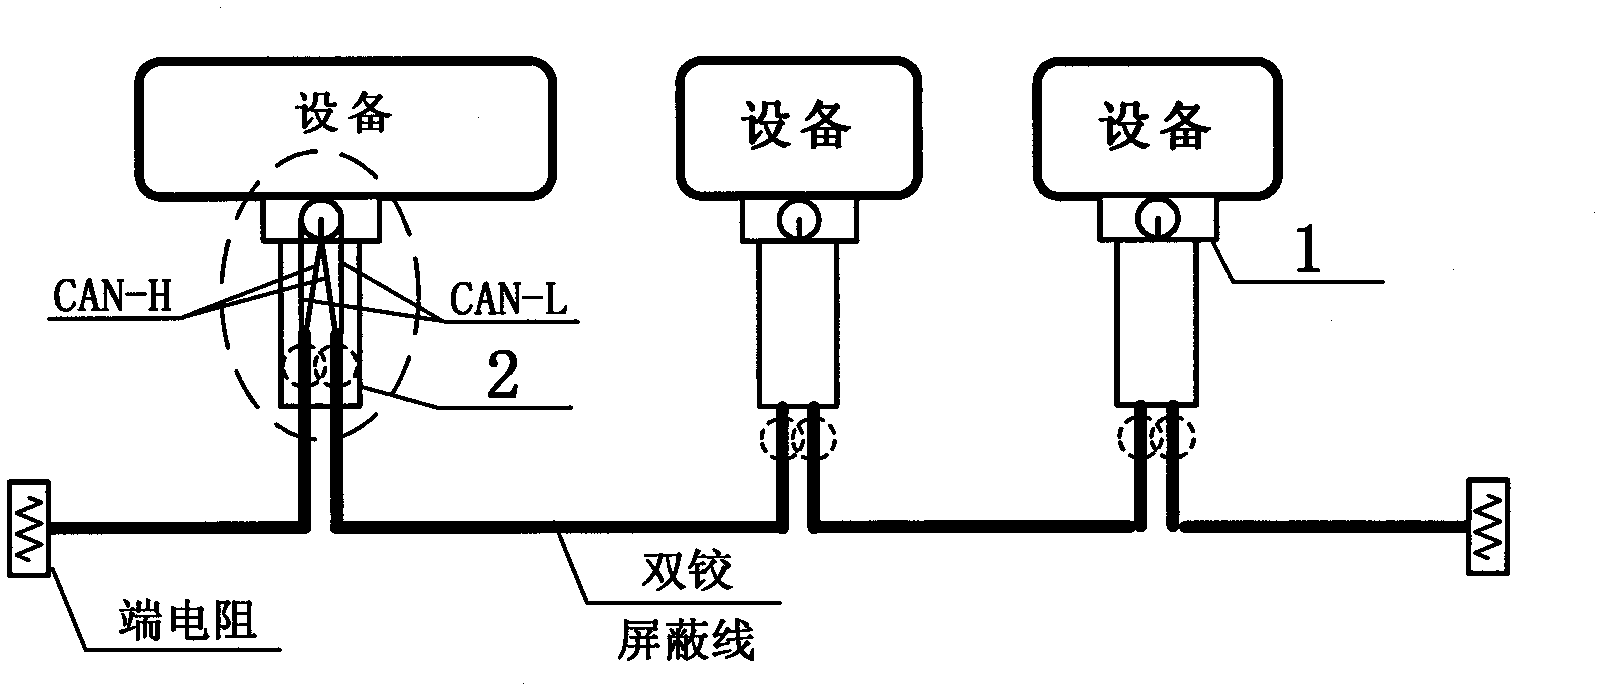 Novel electrical continuous and fully shielded CAN (controller area network) bus connection method